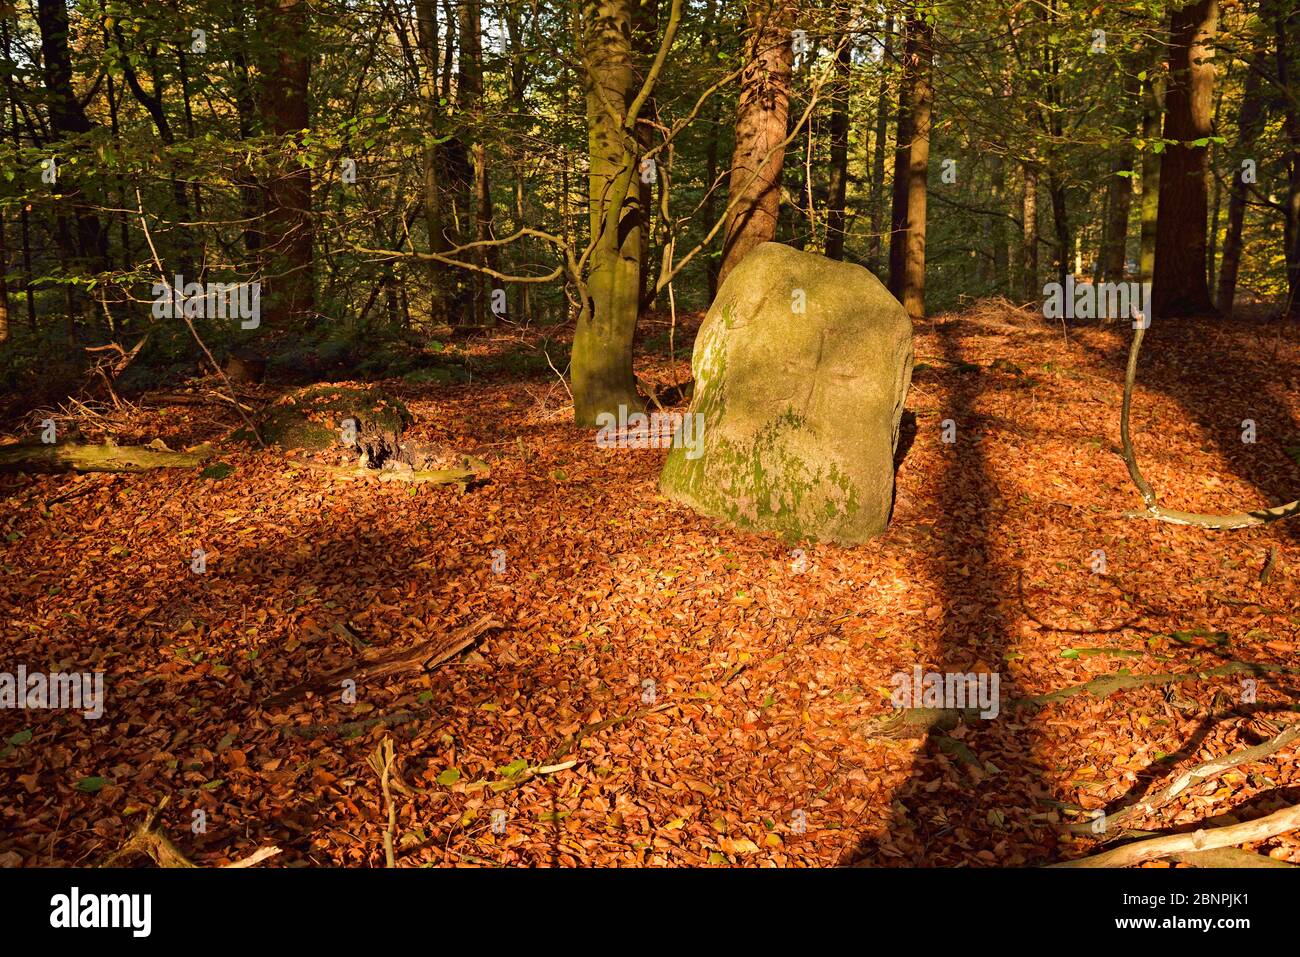 Europe, Germany, Lower Saxony, forest, autumn, deciduous tree, undergrowth, dead wood, natural management, Stock Photo